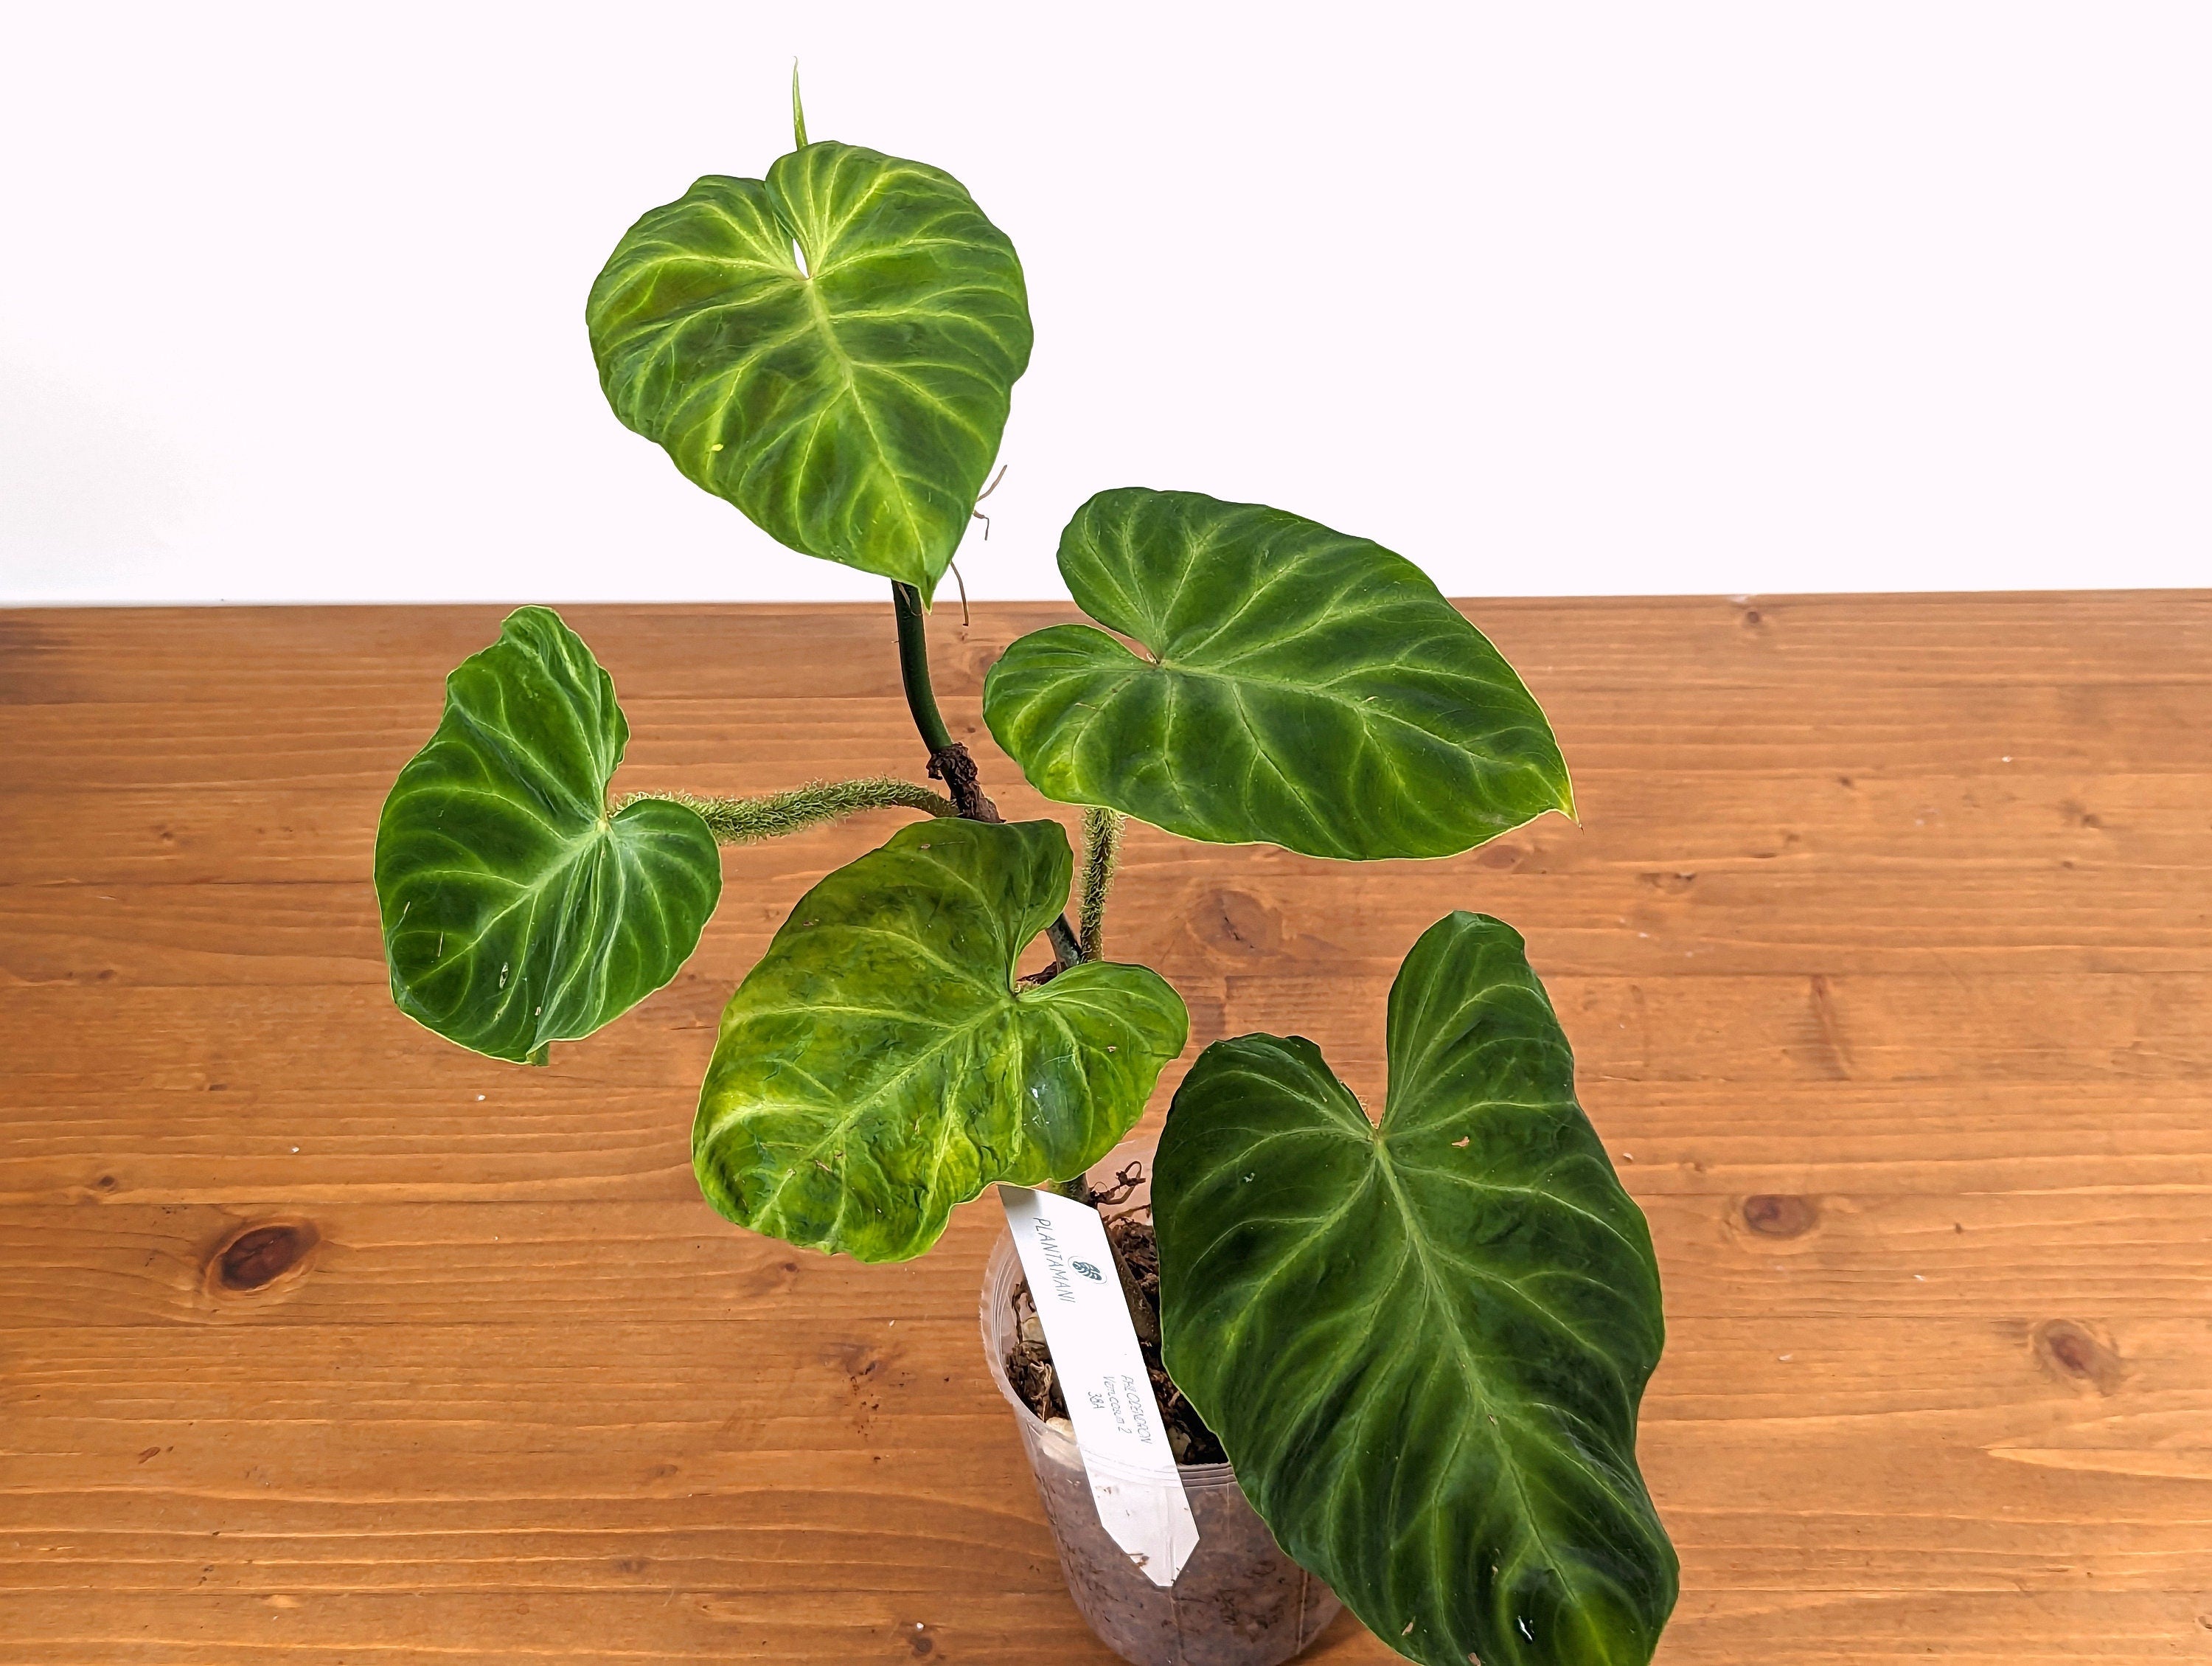 Philodendron verrucosum 2 approx 12&quot; tall - Live Climbing Tropical Houseplant